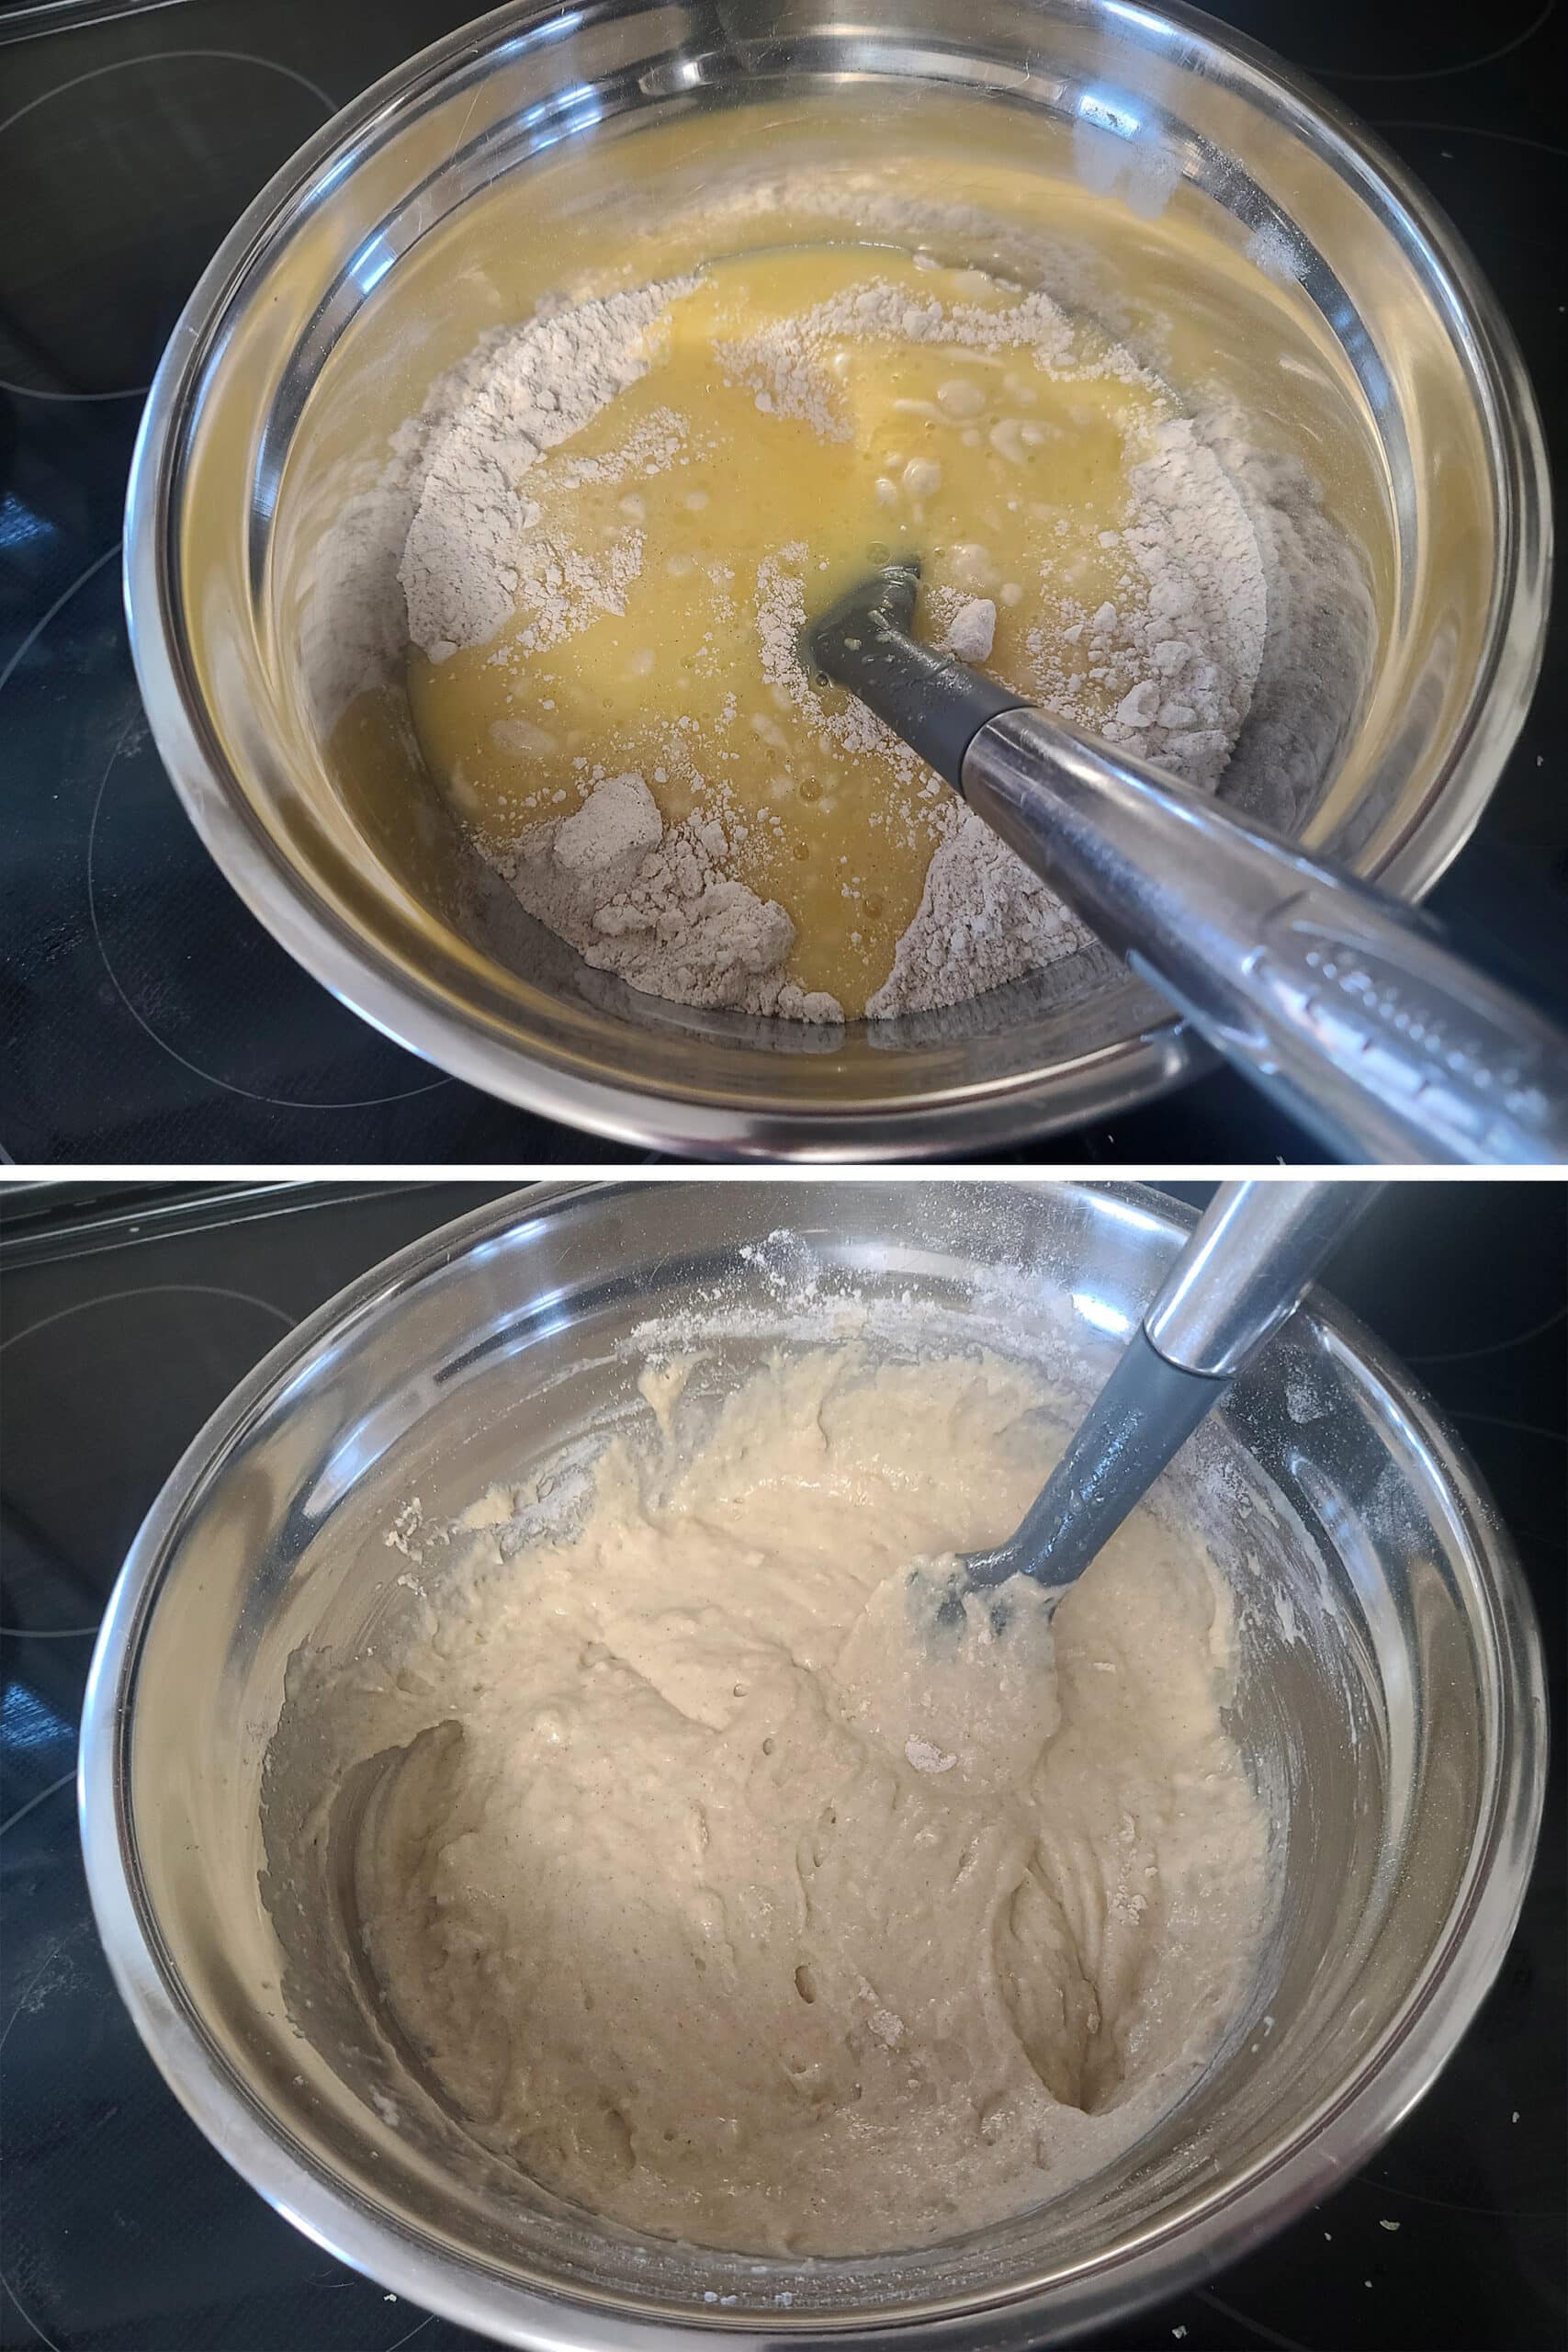 A 2 part image showing the wet ingredients and dry ingredients being mixed together.